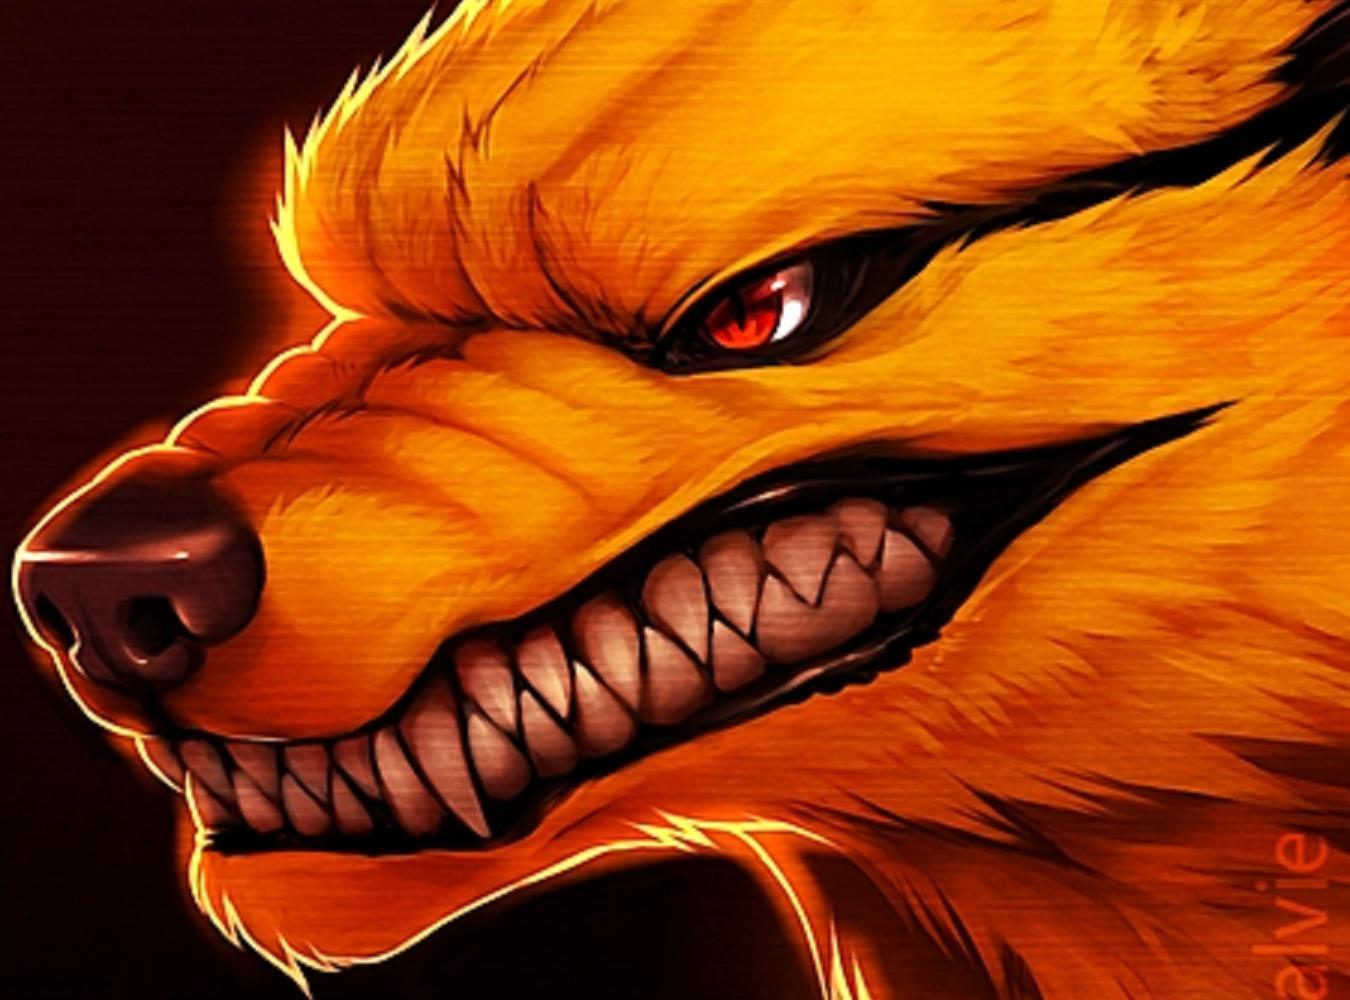 Free download The Nine Tailed Fox wallpaper ForWallpapercom